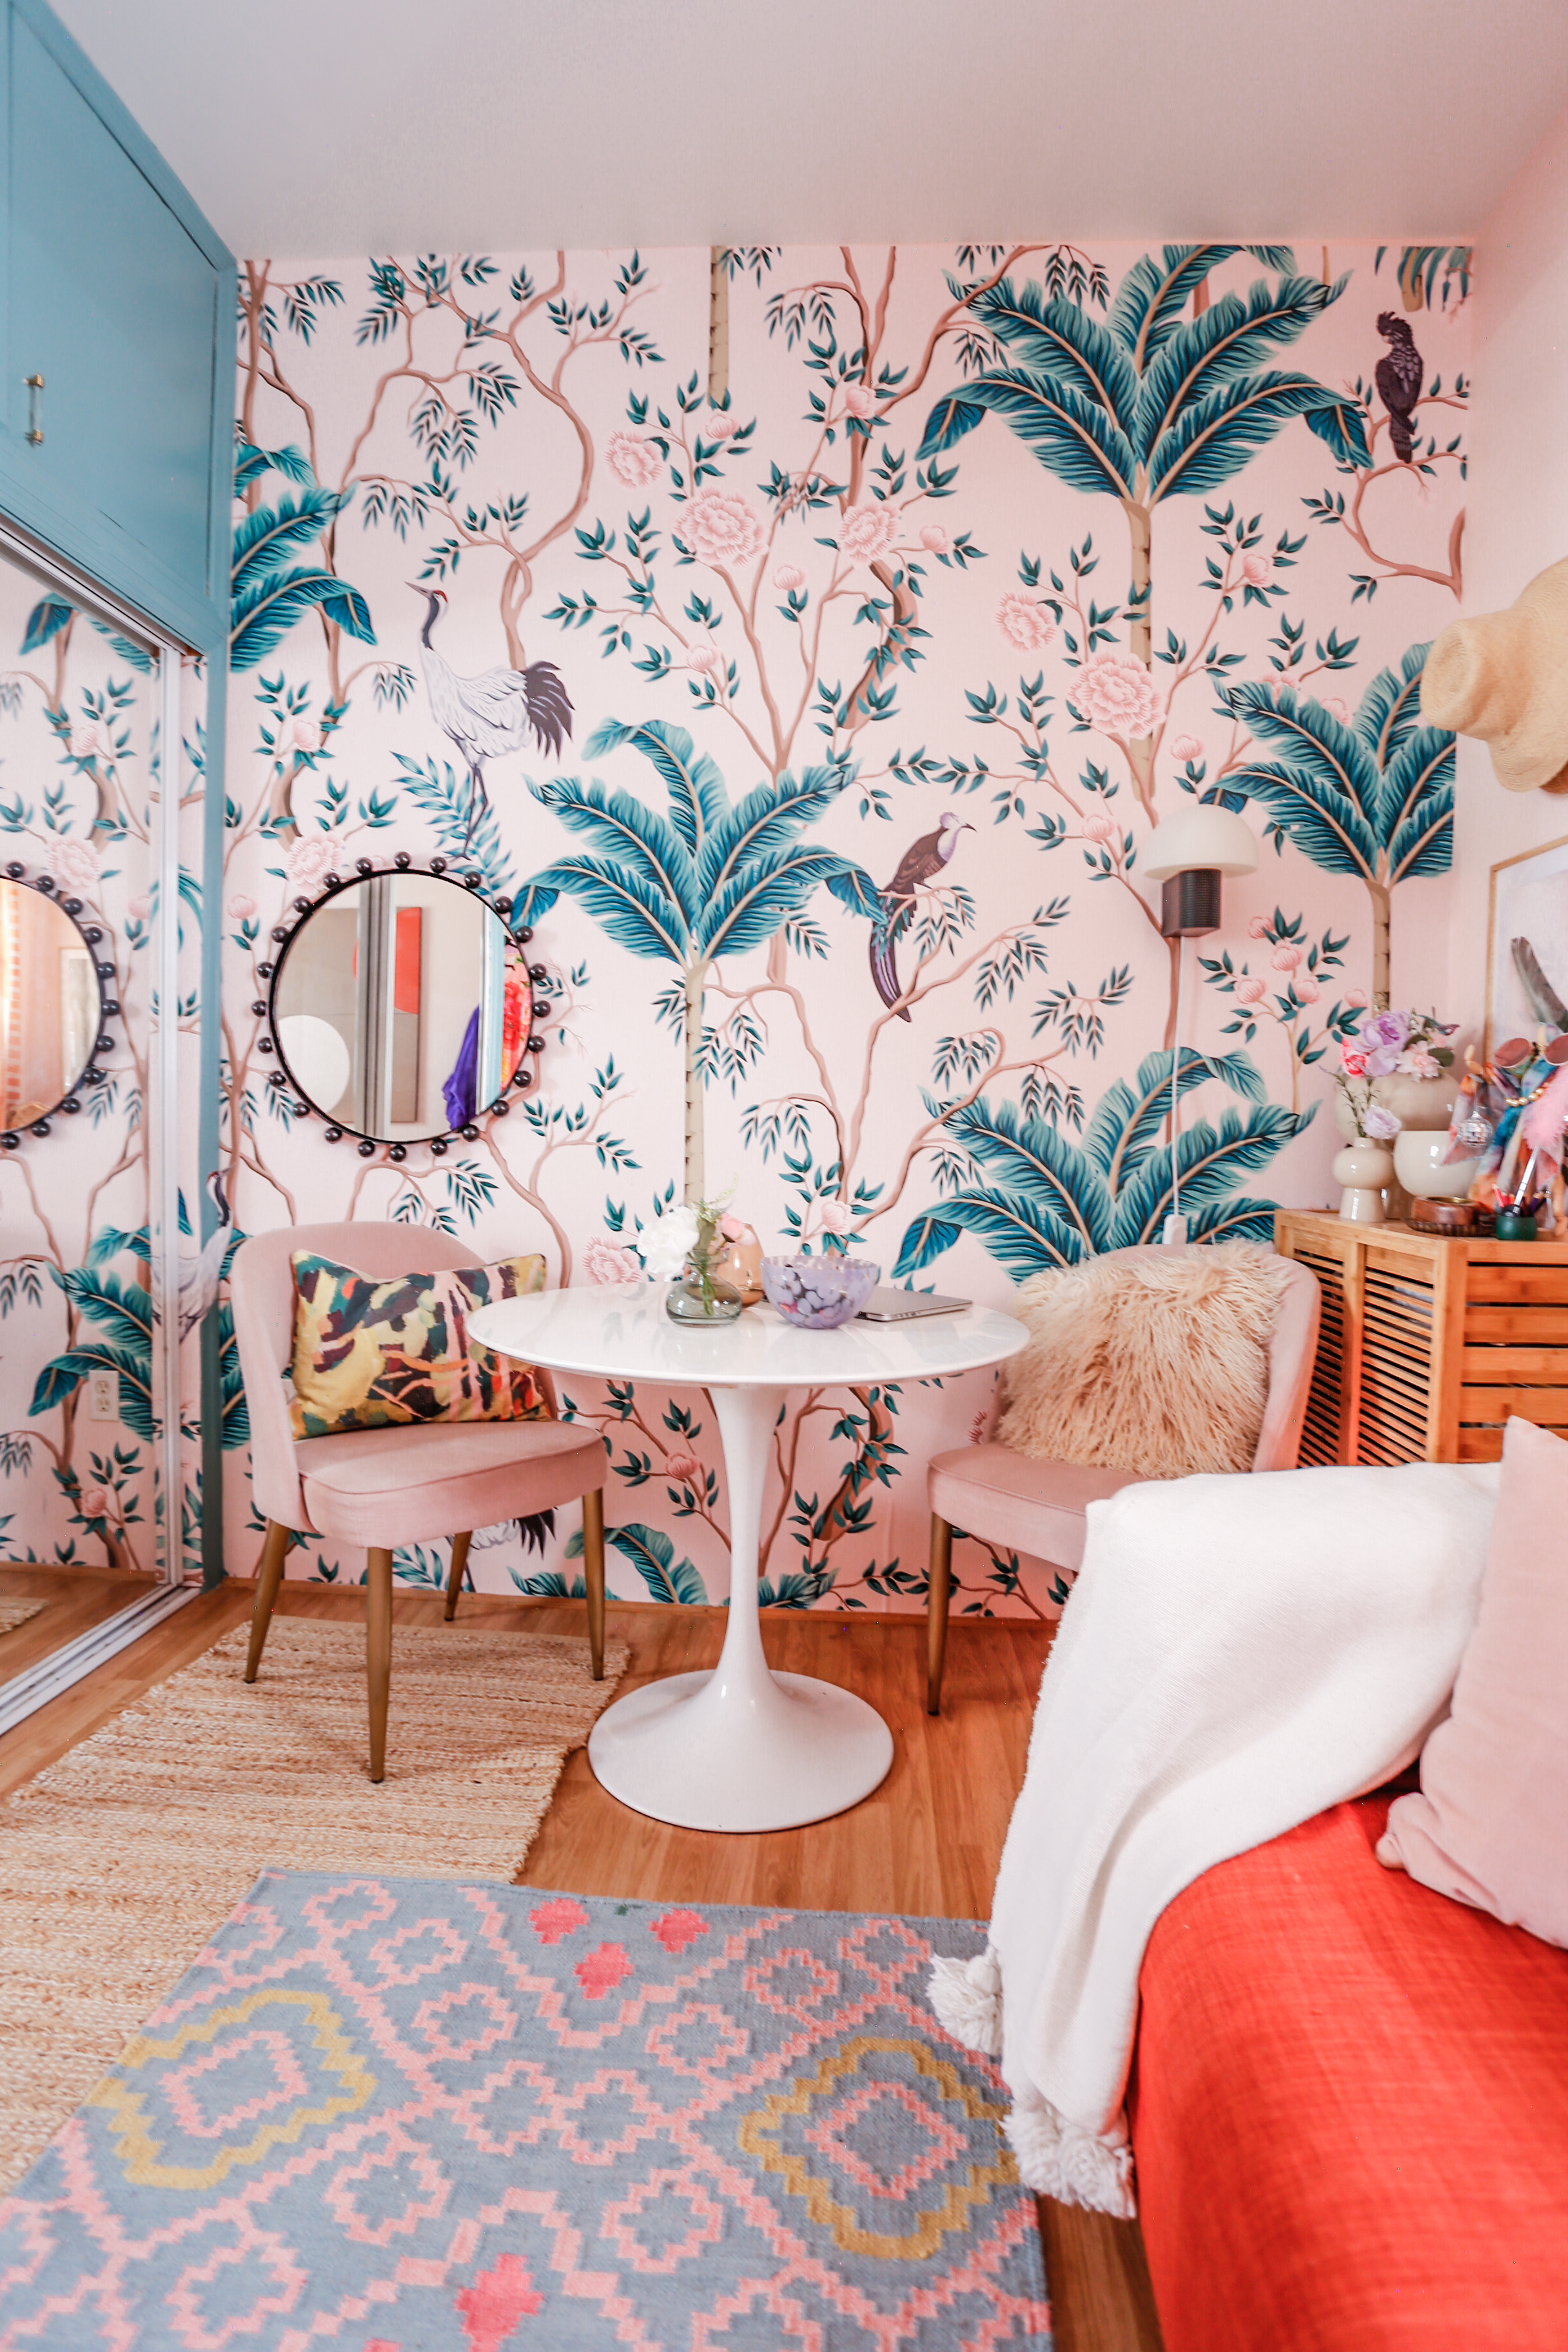 Clare Vacay // Pink and Green Office // Best Blue Green Paint // Pink and Green Chinoiserie Mural // Chinoiserie Wallpaper // Home Office Decor // Colorful Home Office // Pink and Green Home Office // Home Office Decor // Home Office Inspo // Home Office Colors // Megan Zietz Home Office // Maximalist Home Office // Green and Pink Office Ideas